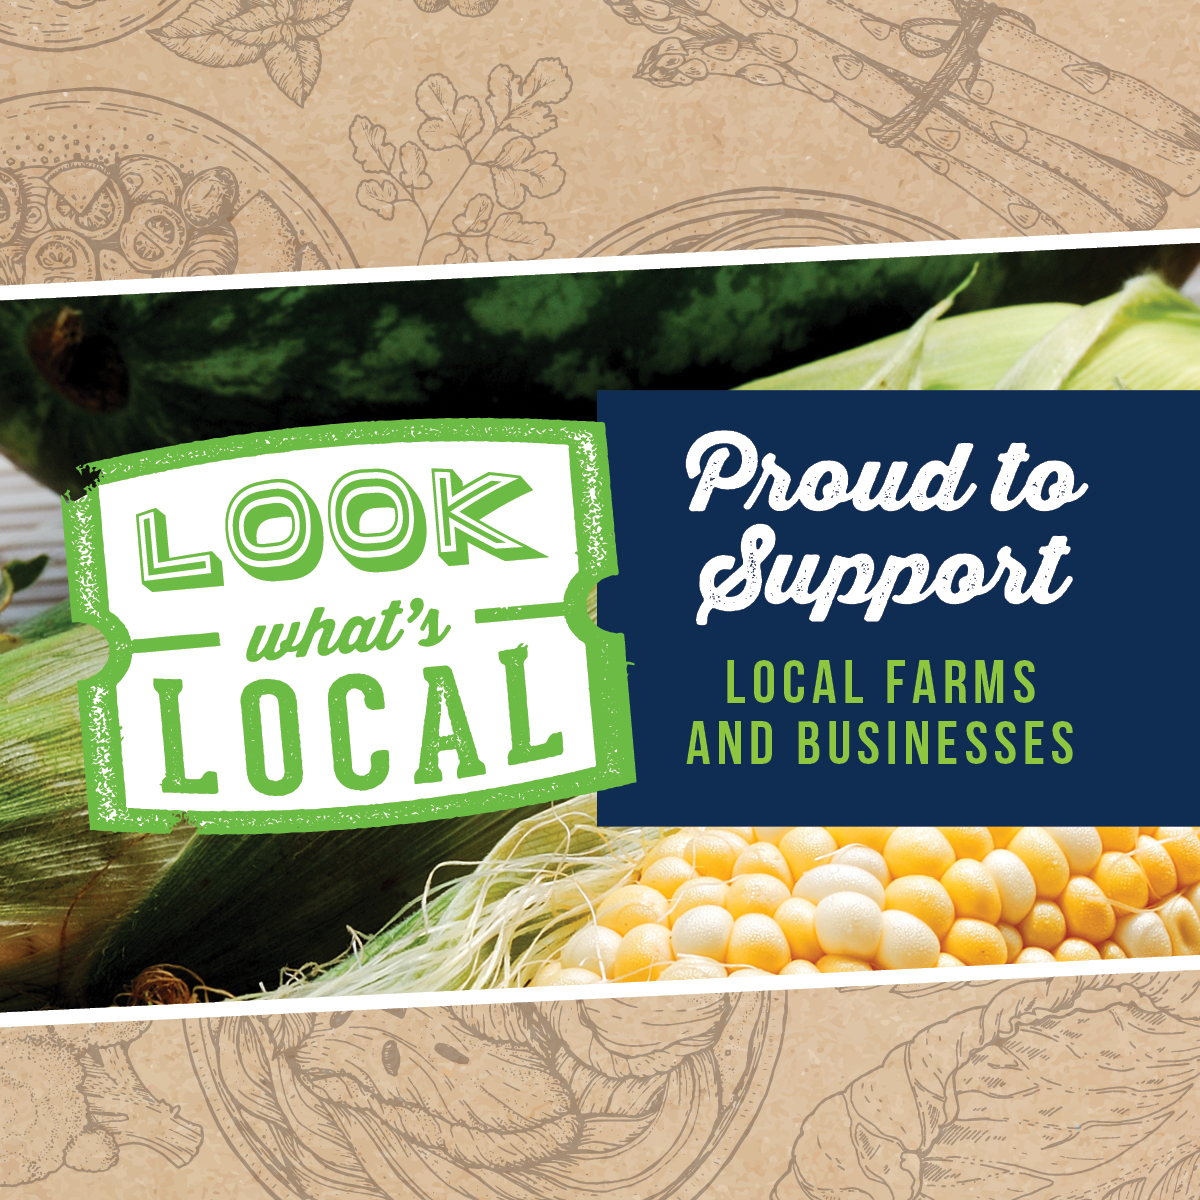 Look What's Local! Shop Local! Proud to support local farms and businesses.